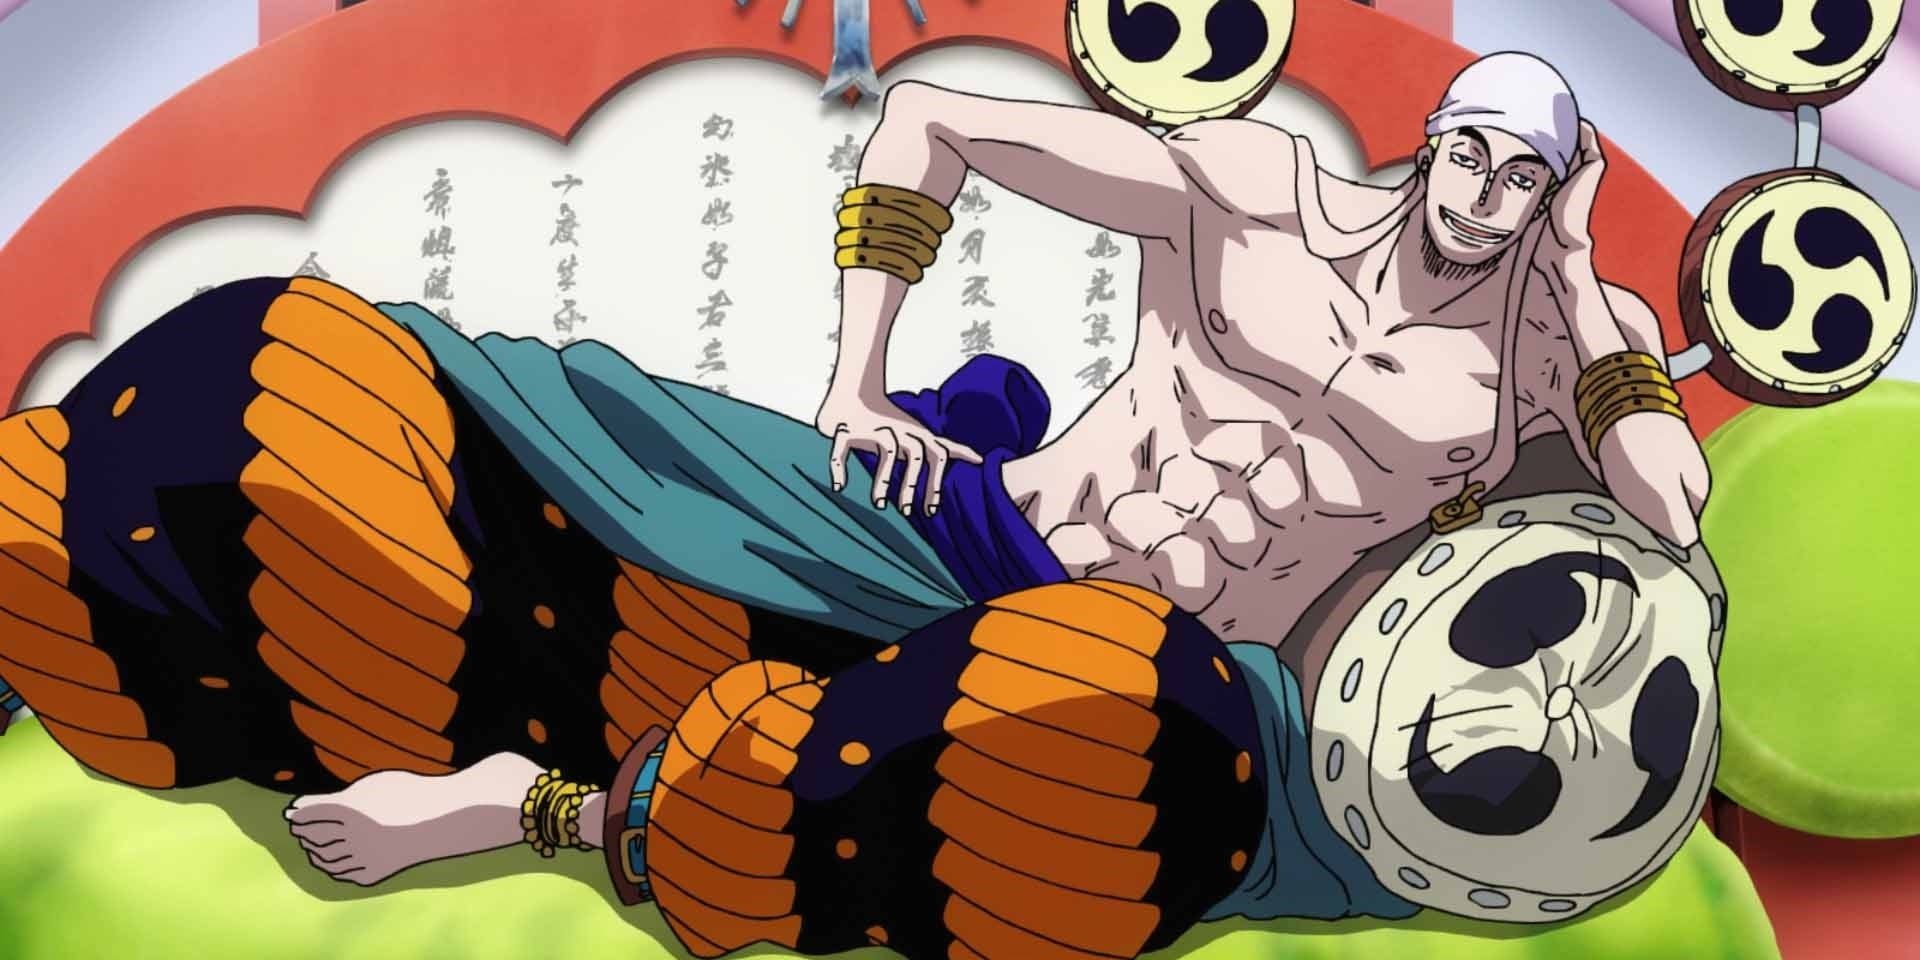 Enel Skypiea leaning on a bolster with a happy smile